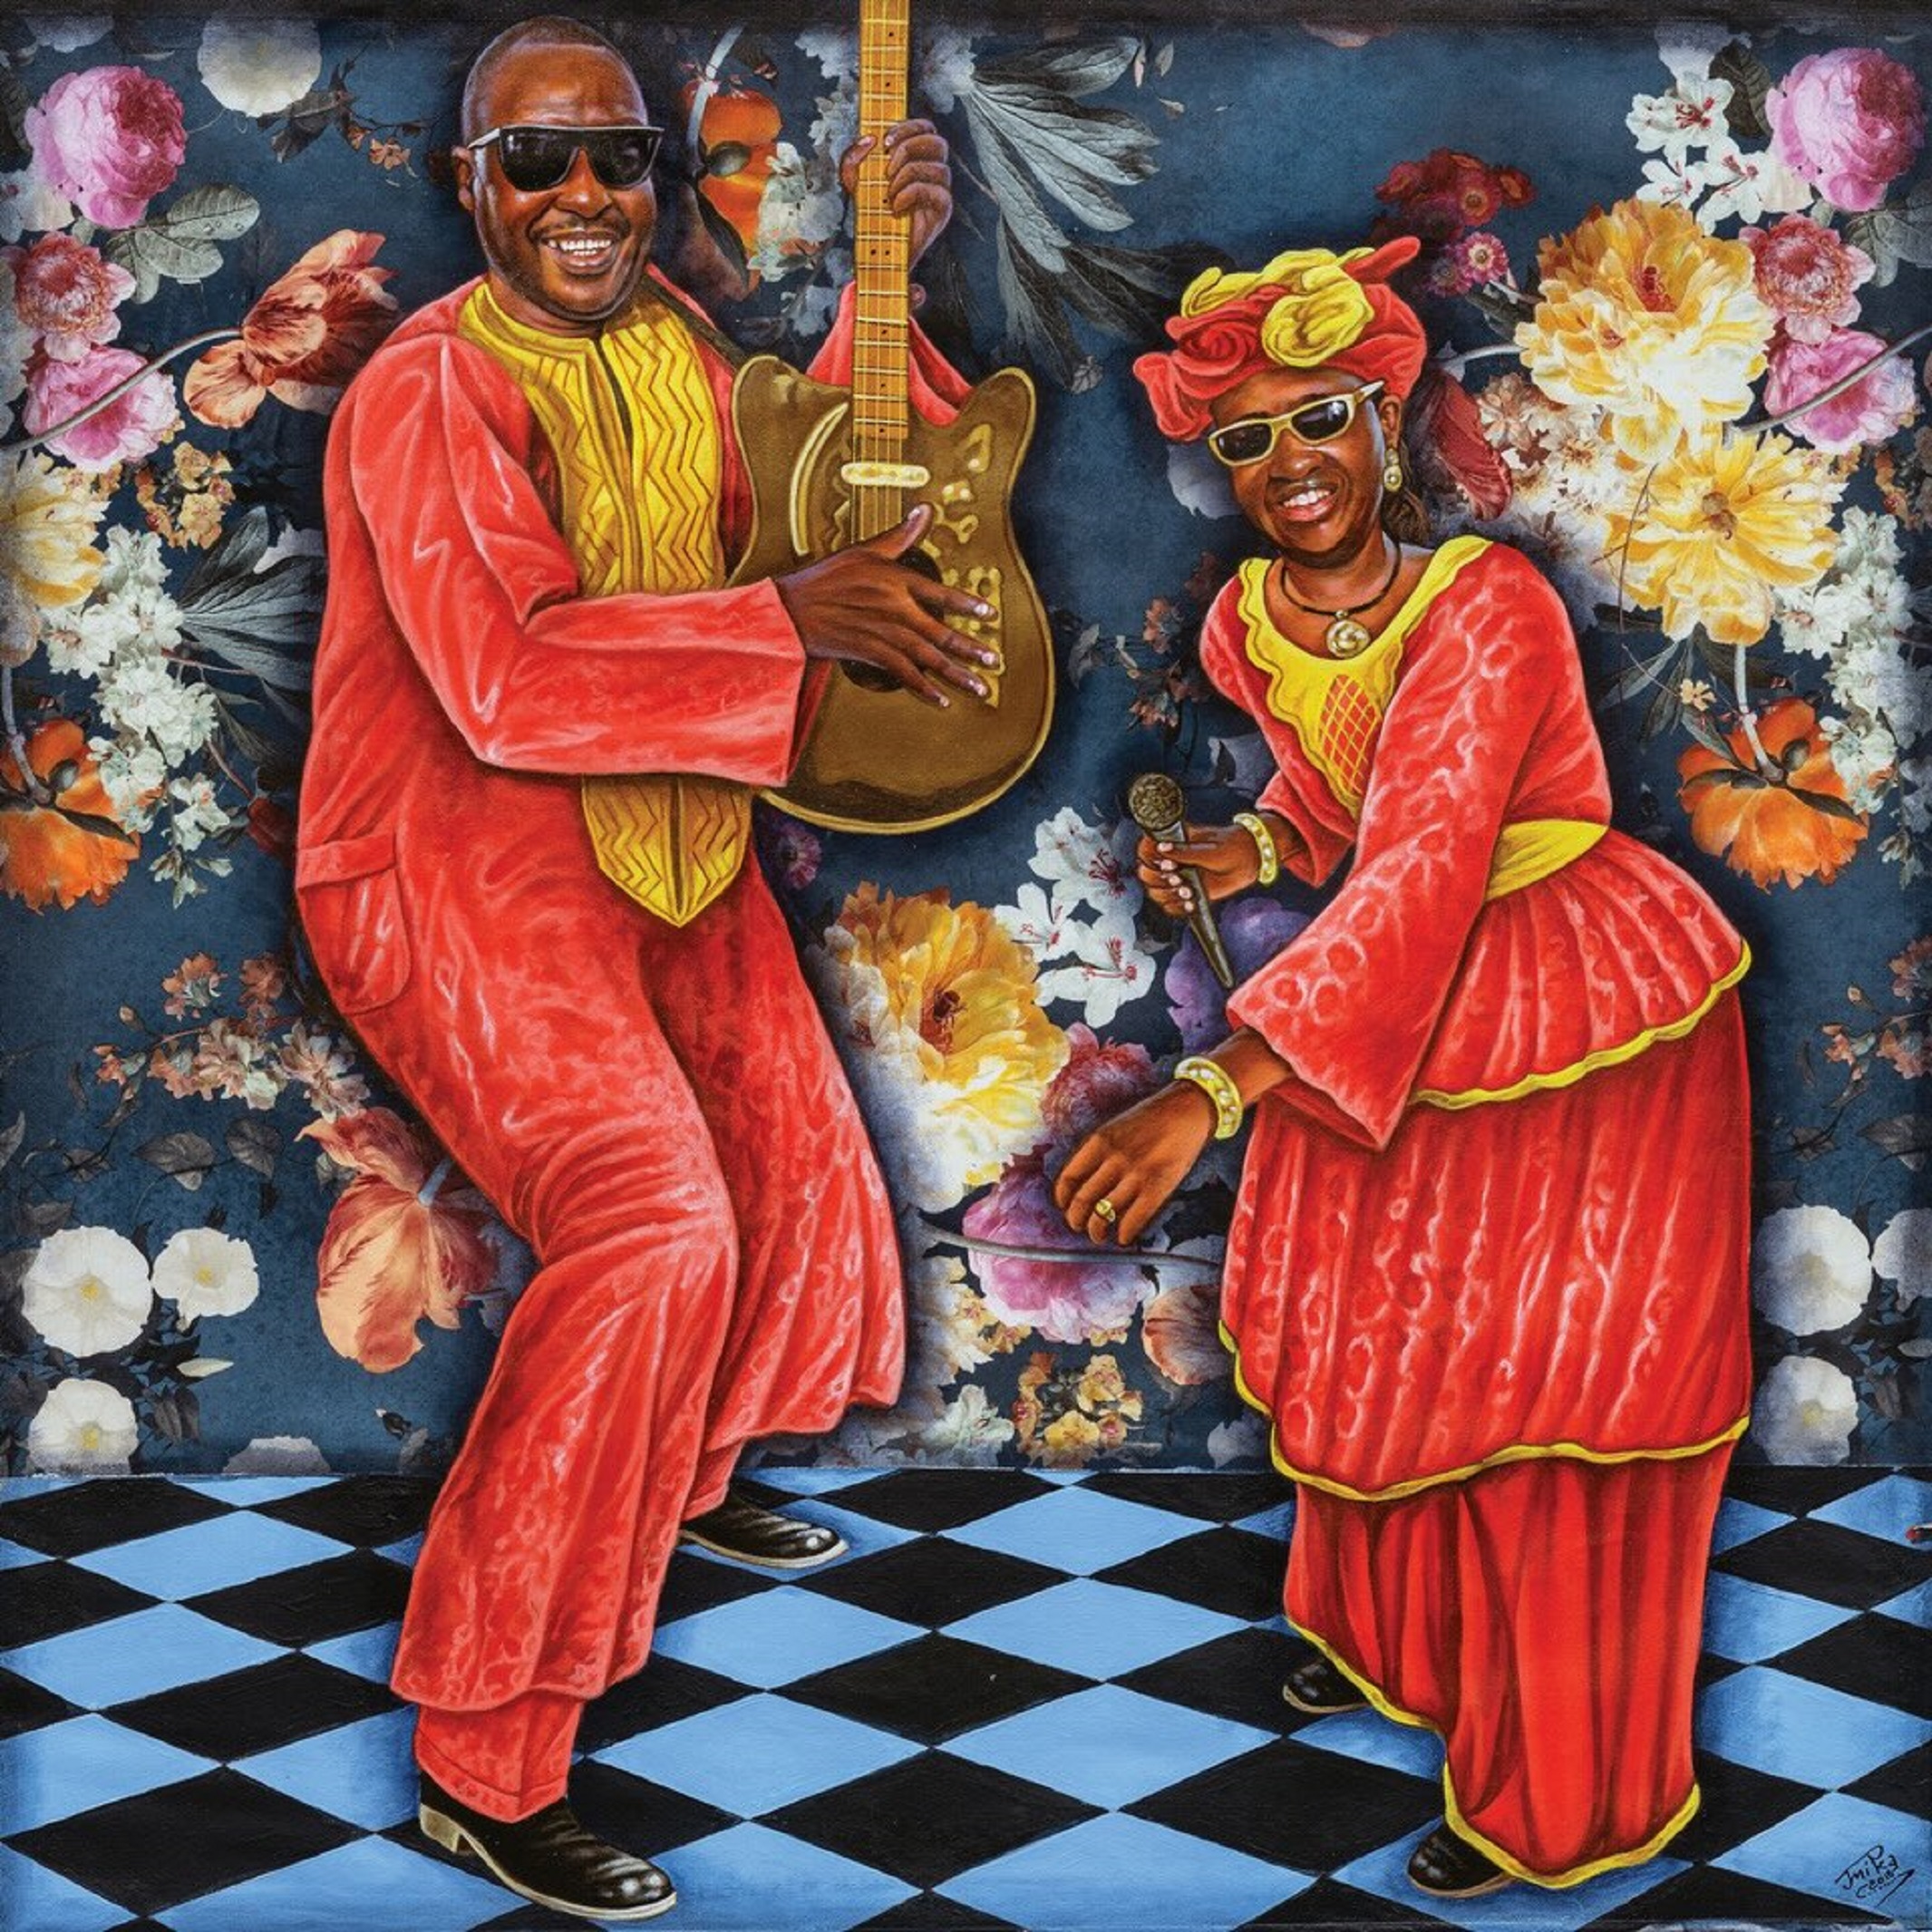 Amadou & Mariam Officially Announce The Release Of An Upcoming "Best Of" Album, La Vie Est Belle